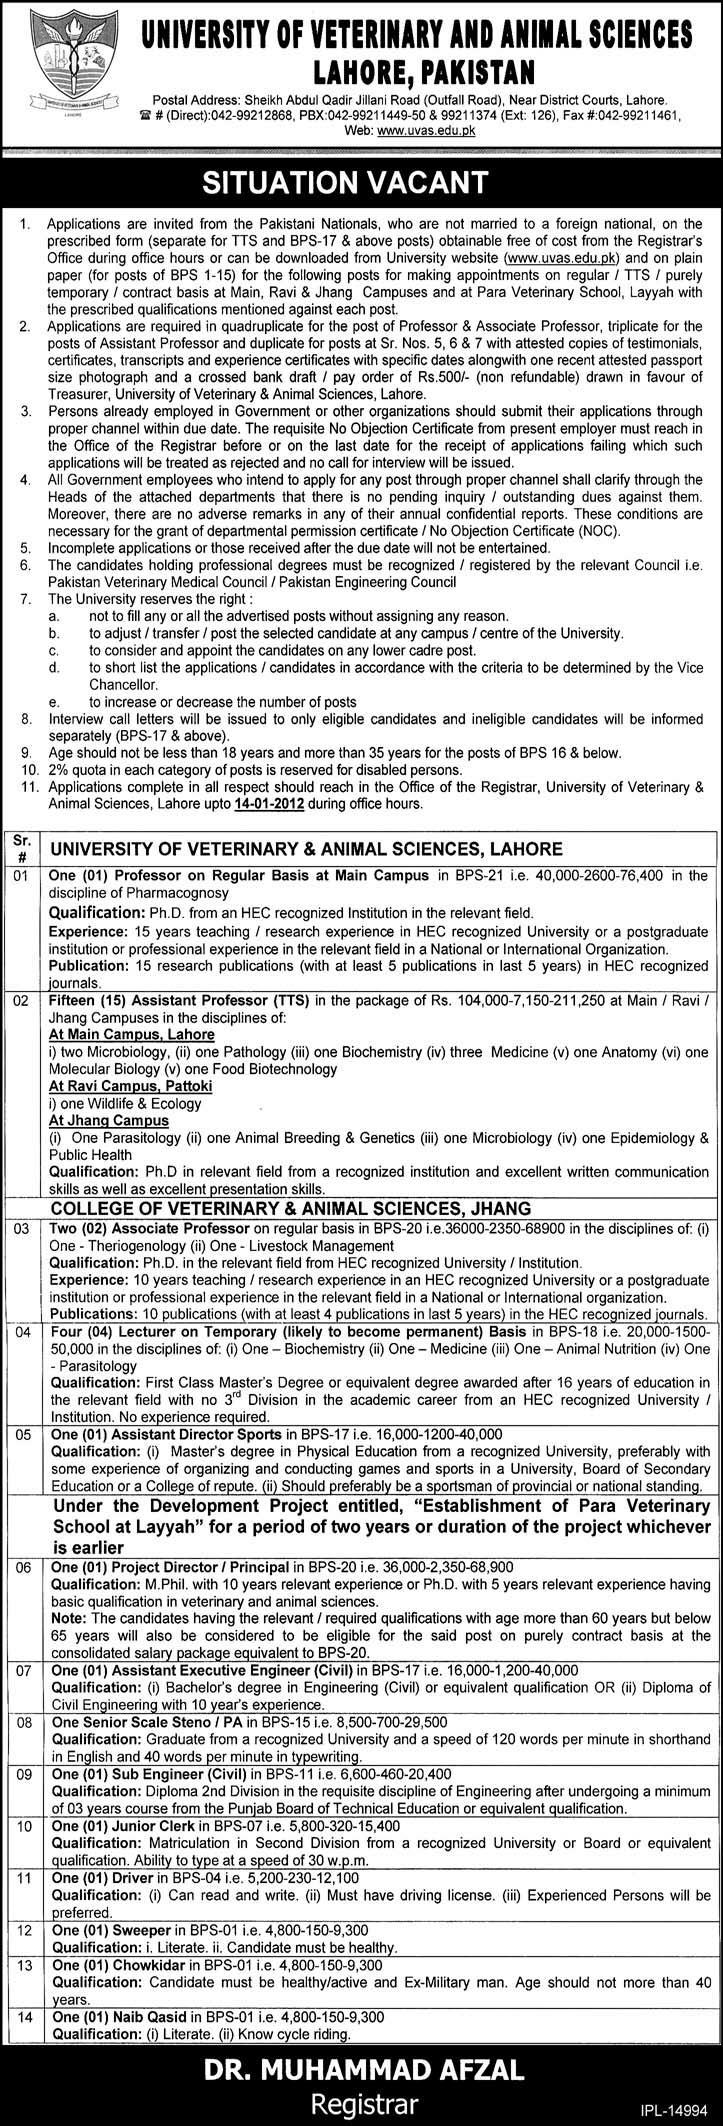 University of Veterinary and Animal Sciences Lahore, Pakistan Jobs Opportunity